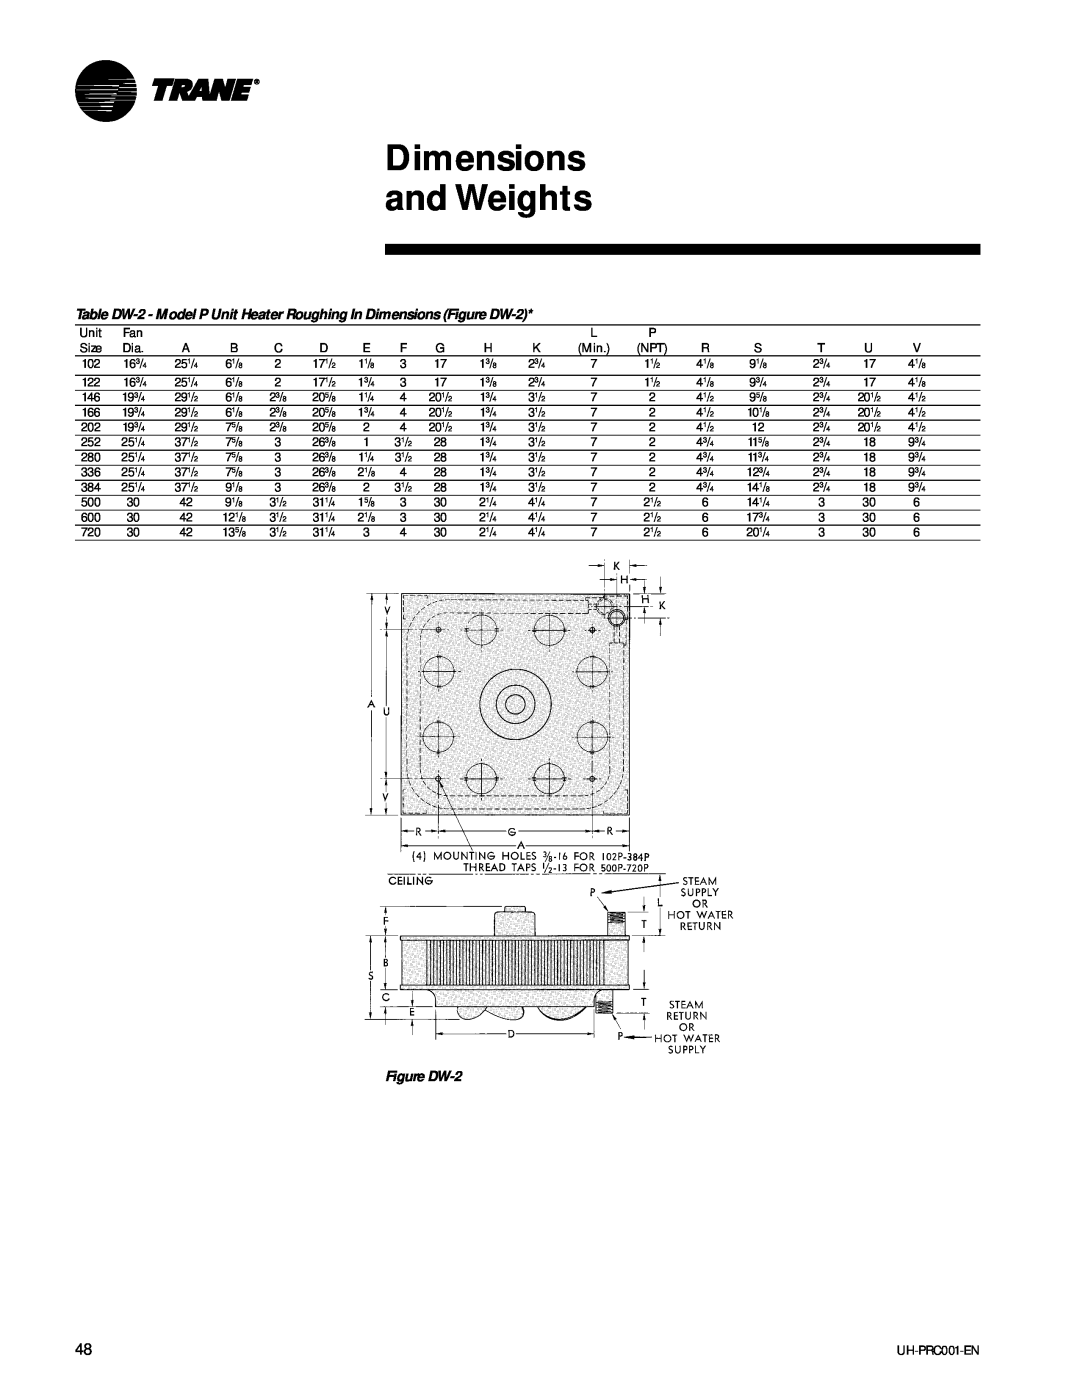 Trane UH-PRC001-EN manual Dimensions and Weights, Figure DW-2 